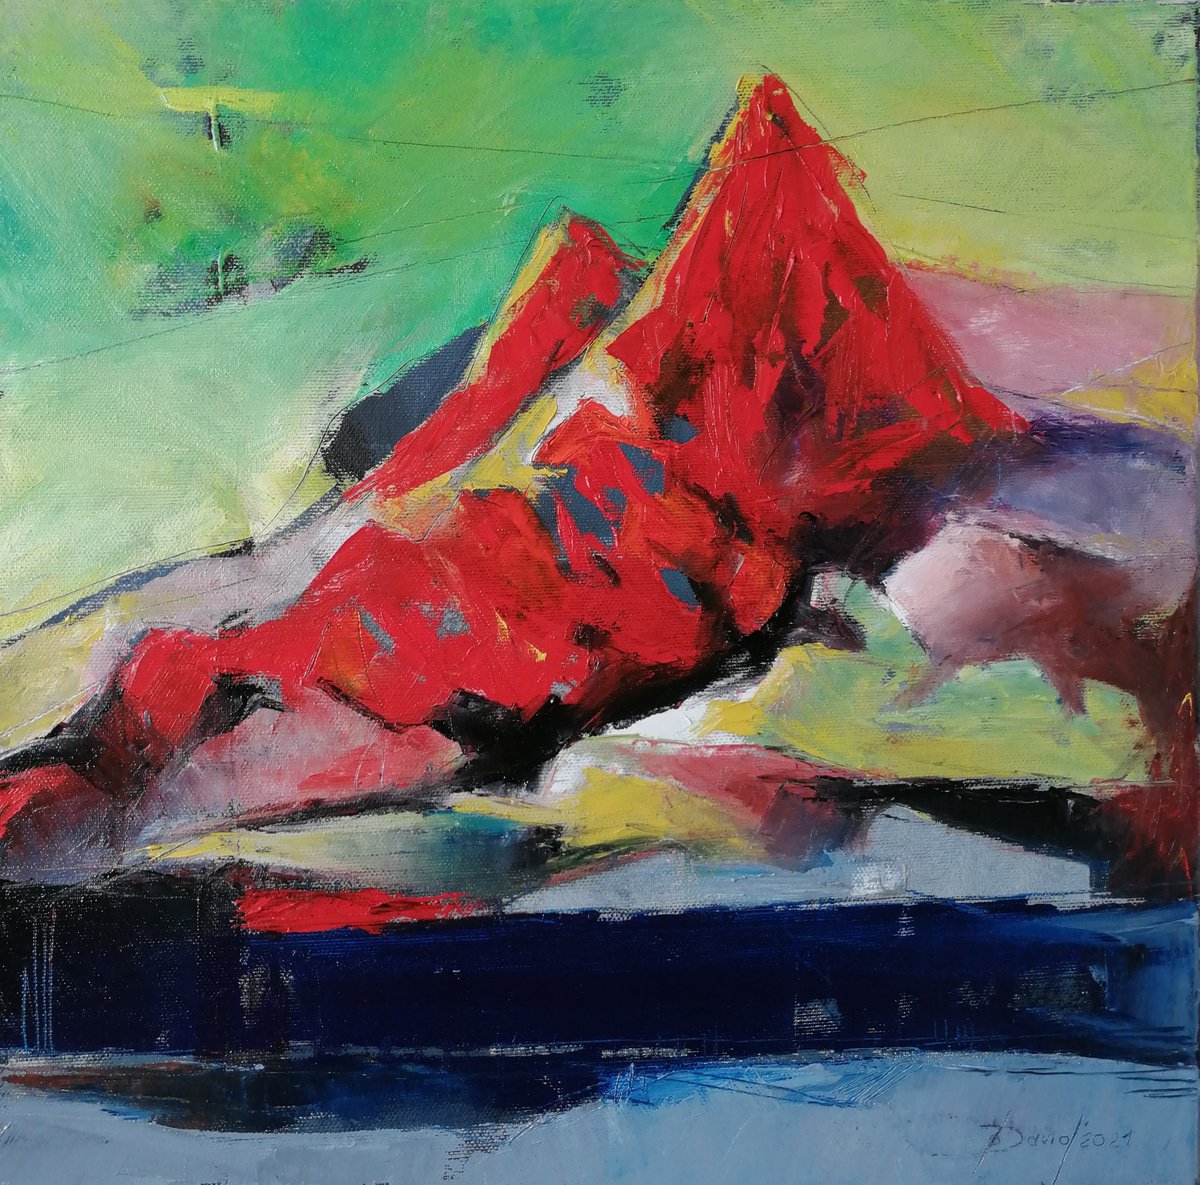 Expressionistic mountain landscape by Olga David